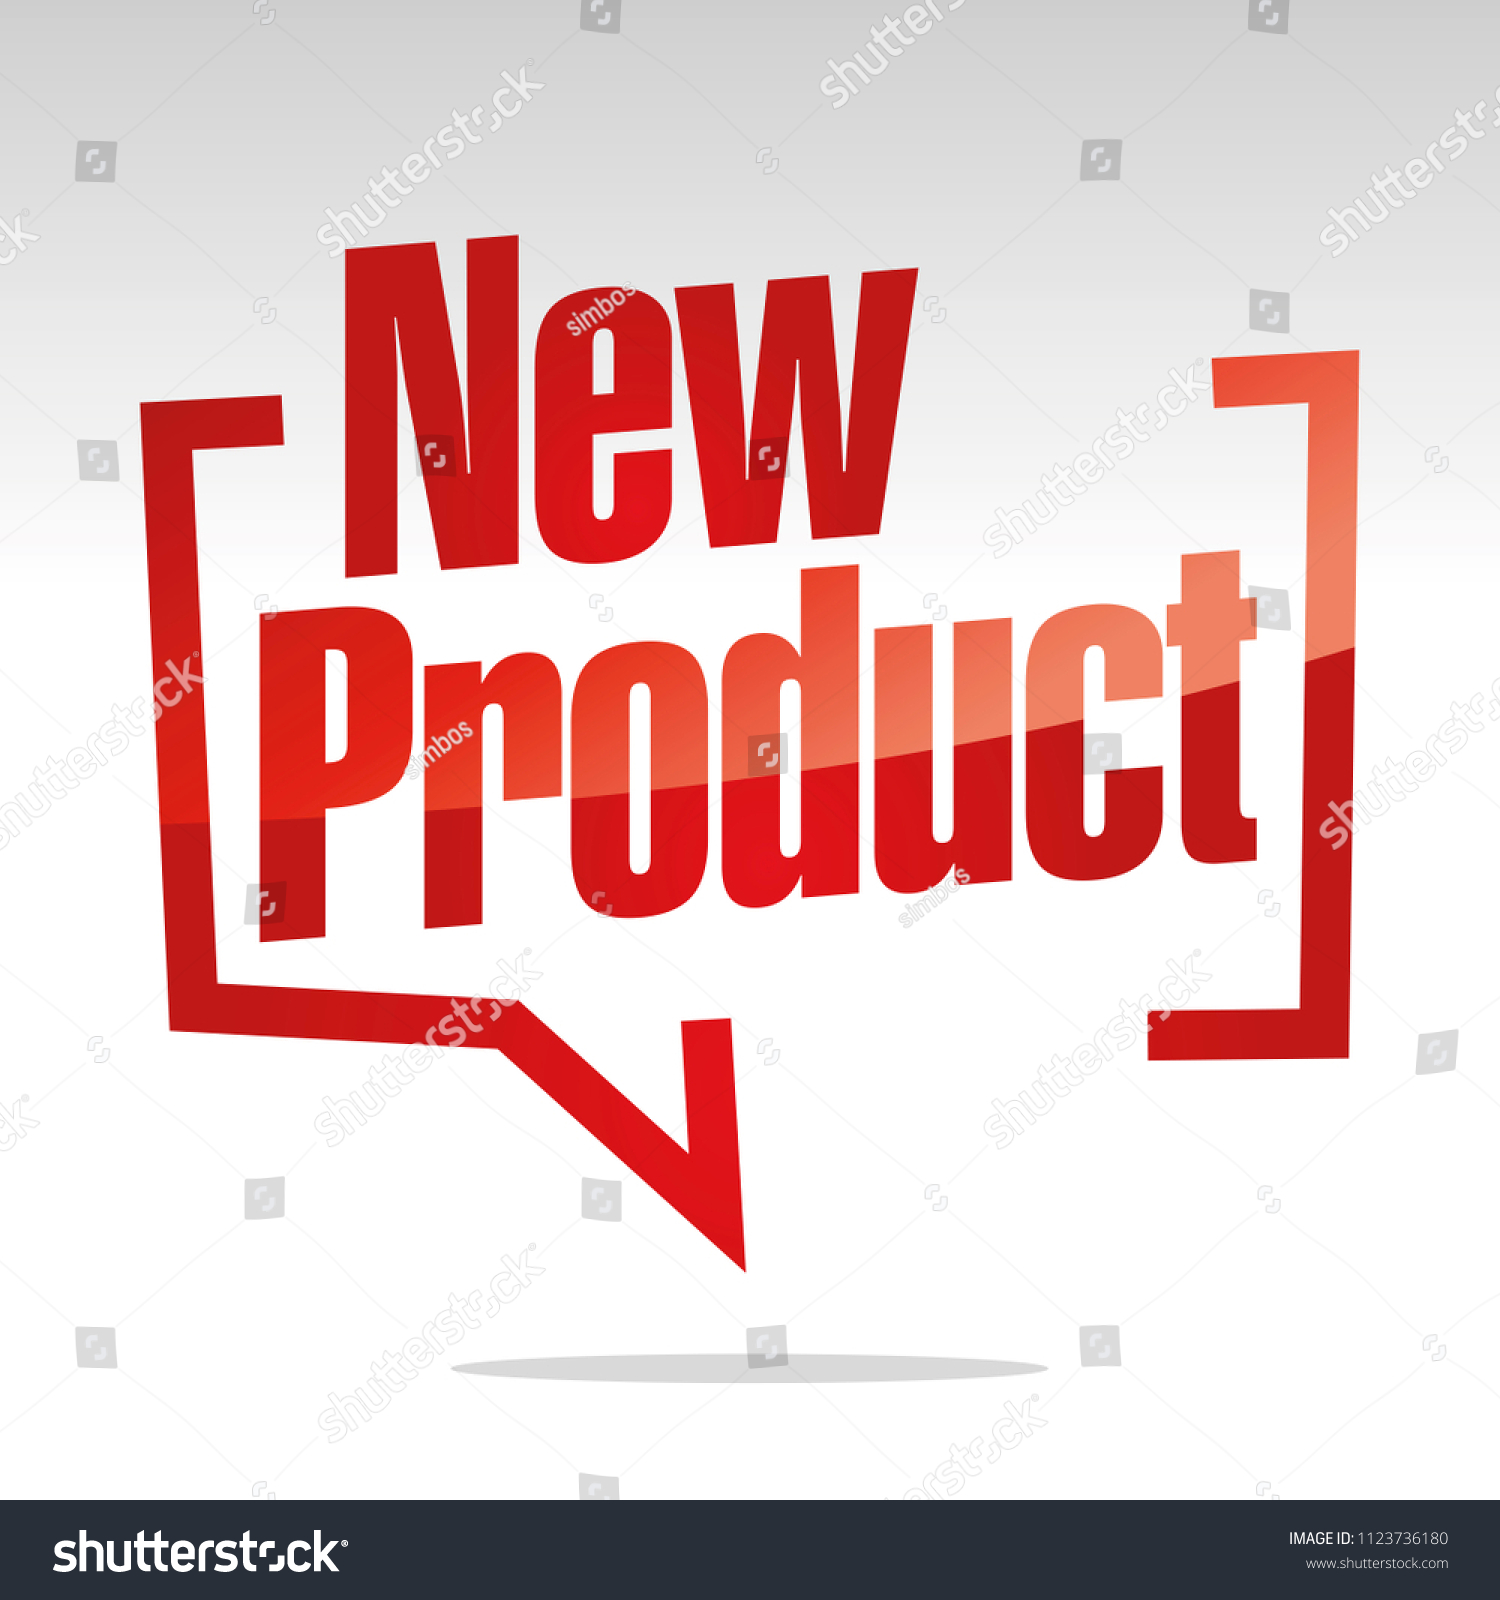 New Product Brackets Speech Red White Stock Vector Royalty Free